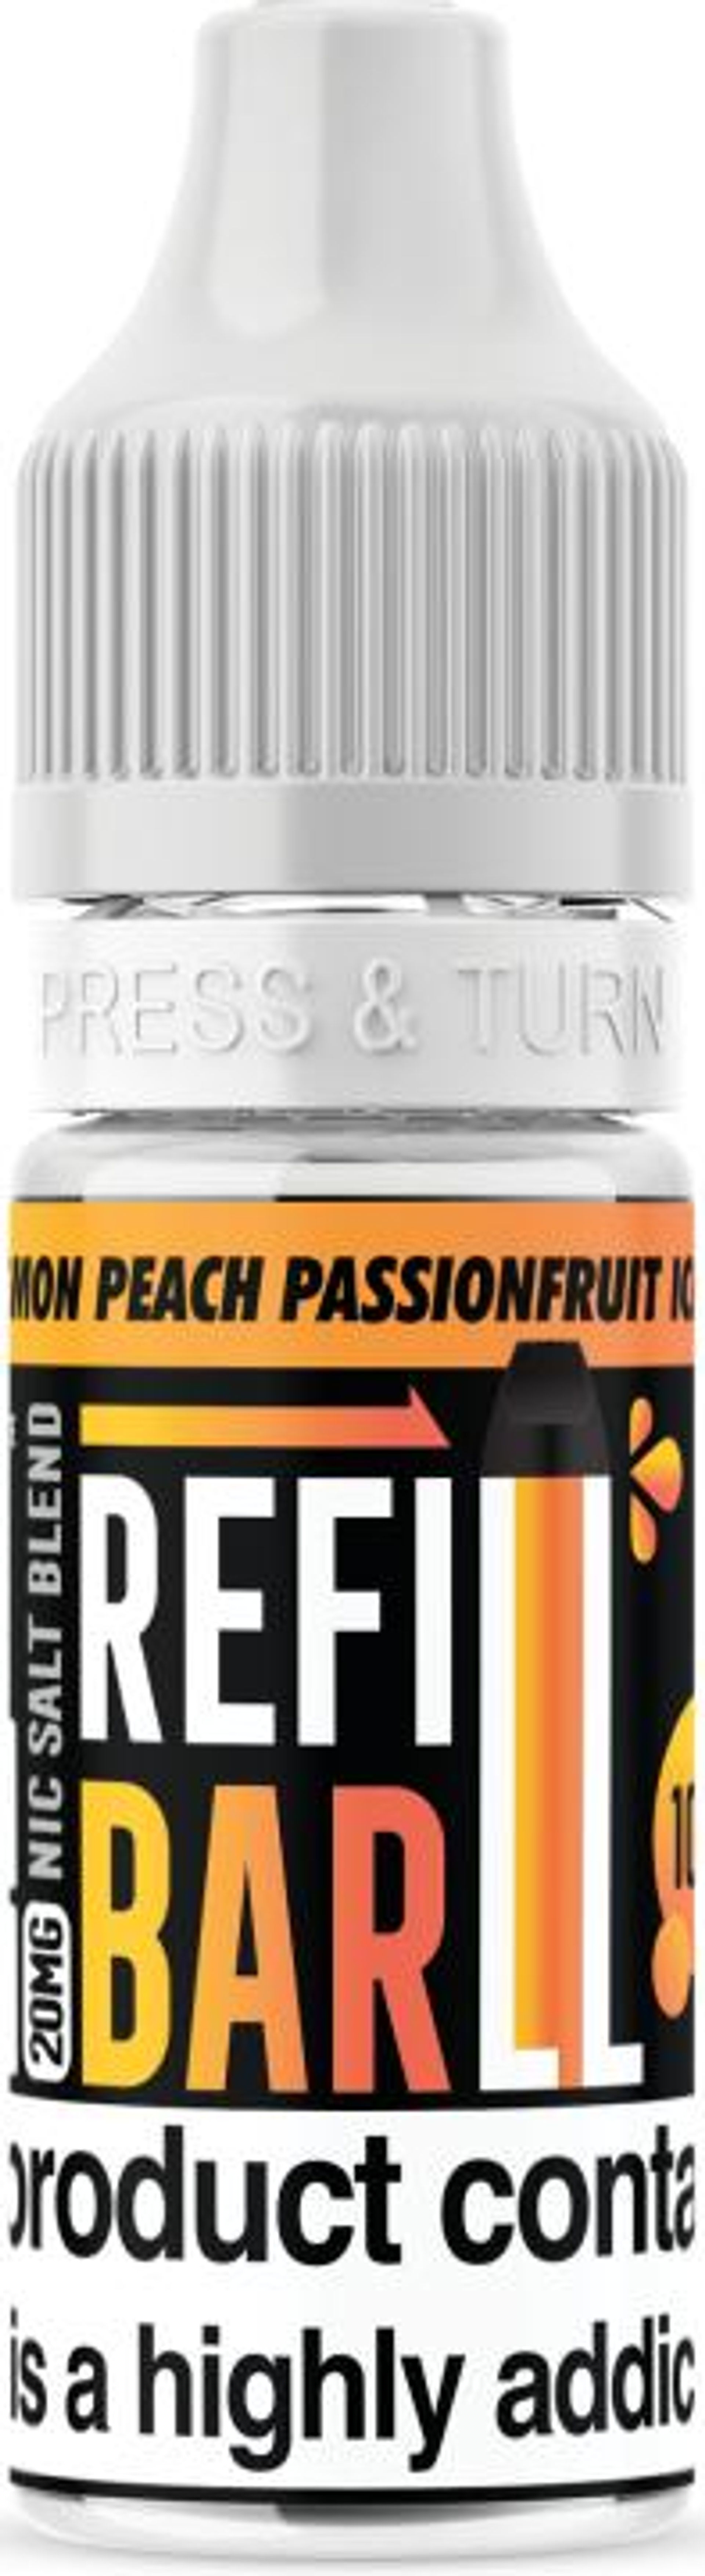 Image of Lemon Peach Passionfruit Ice by Refill Bar Salts